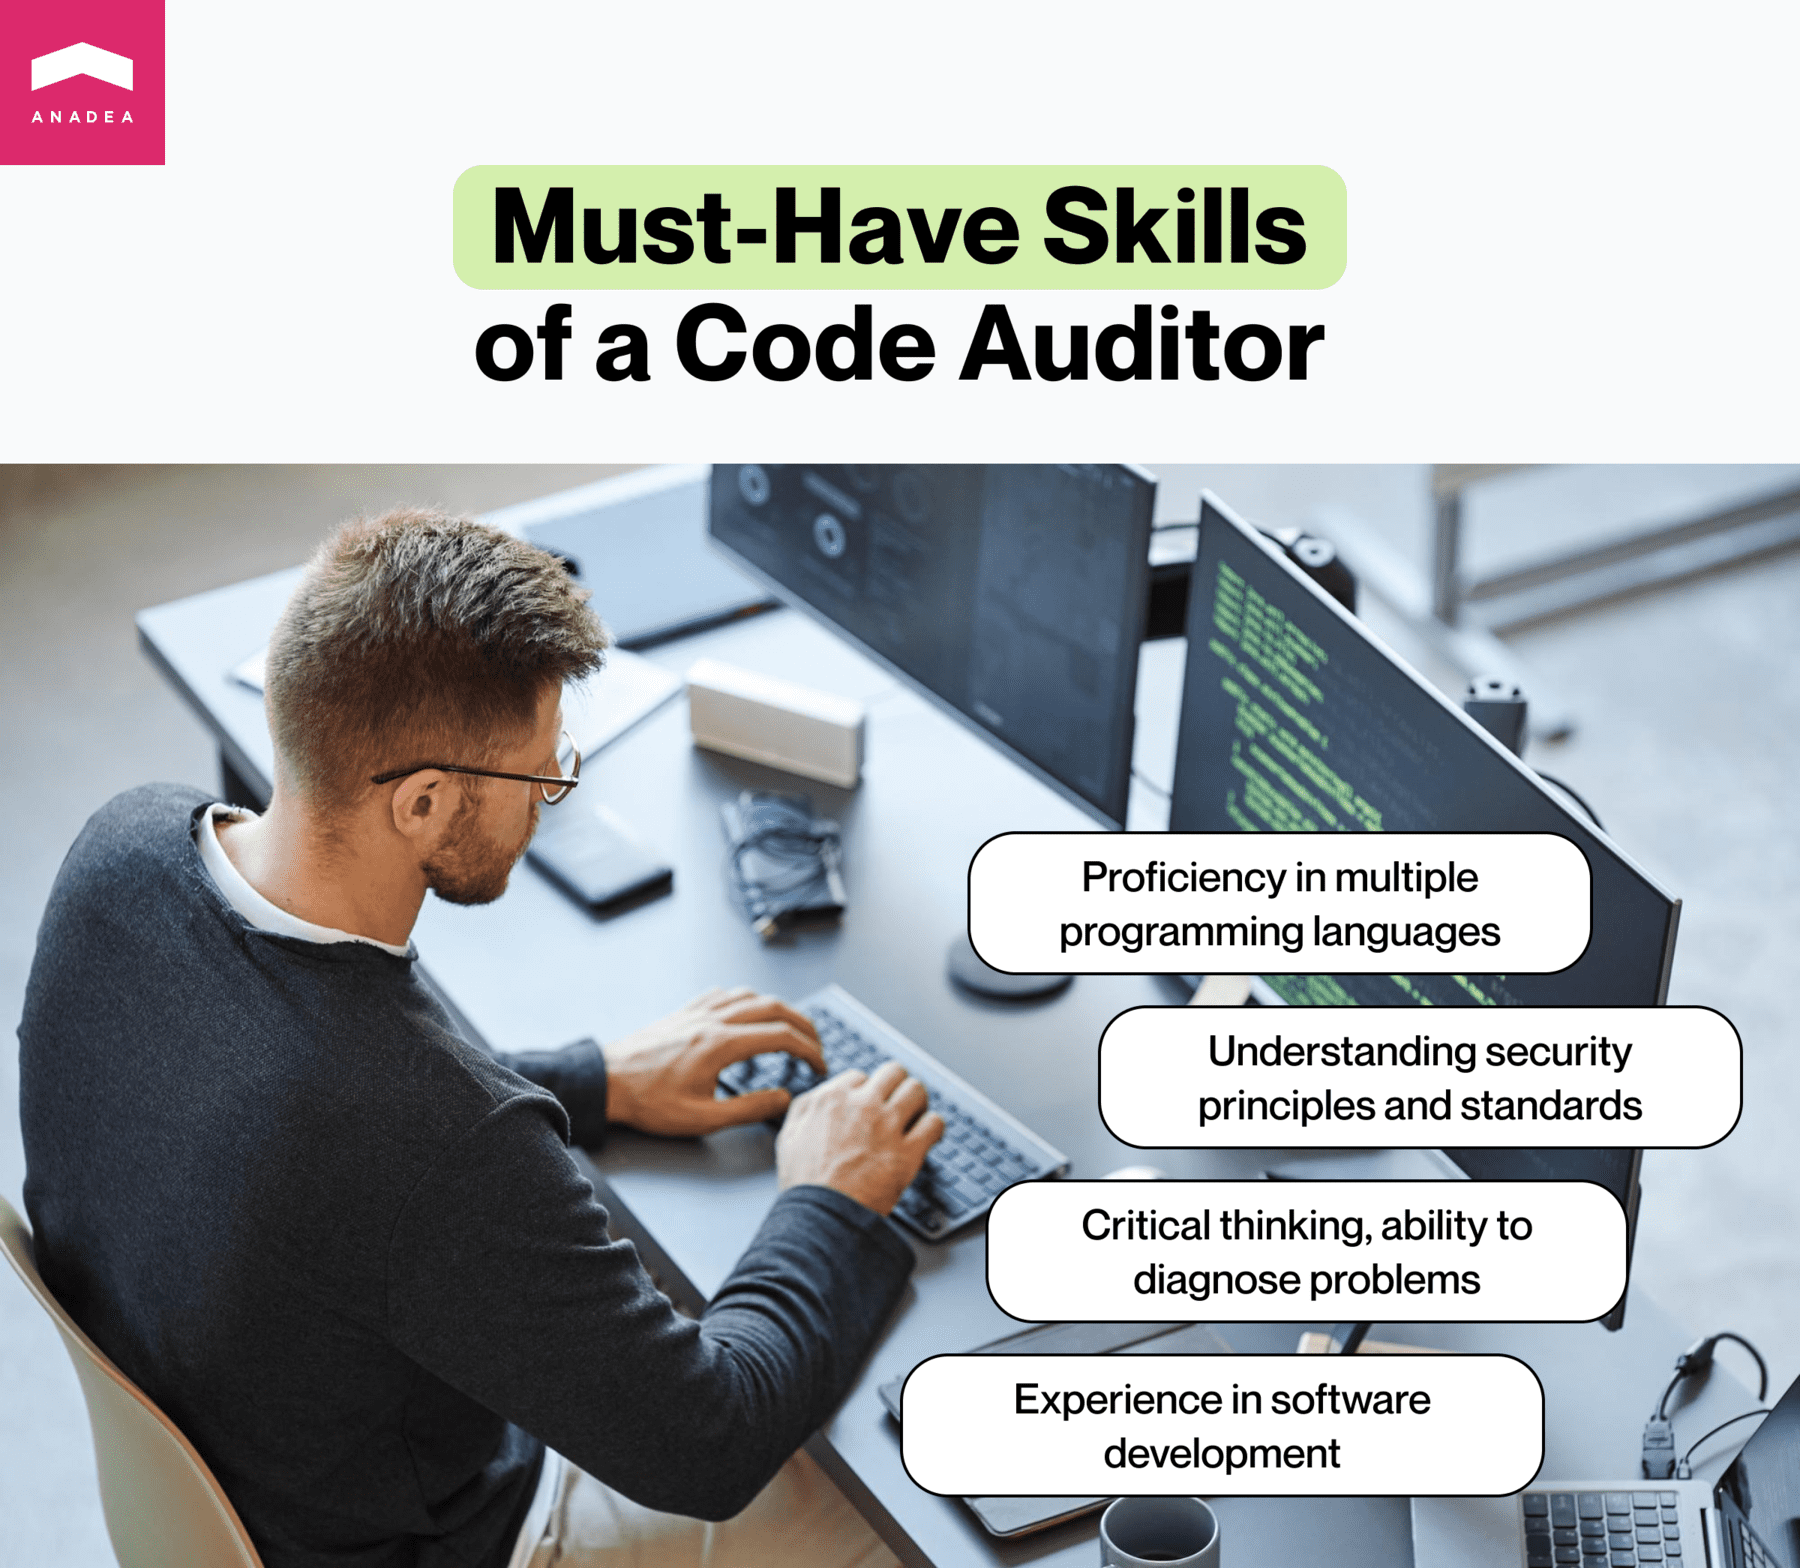 Skills of a code auditor